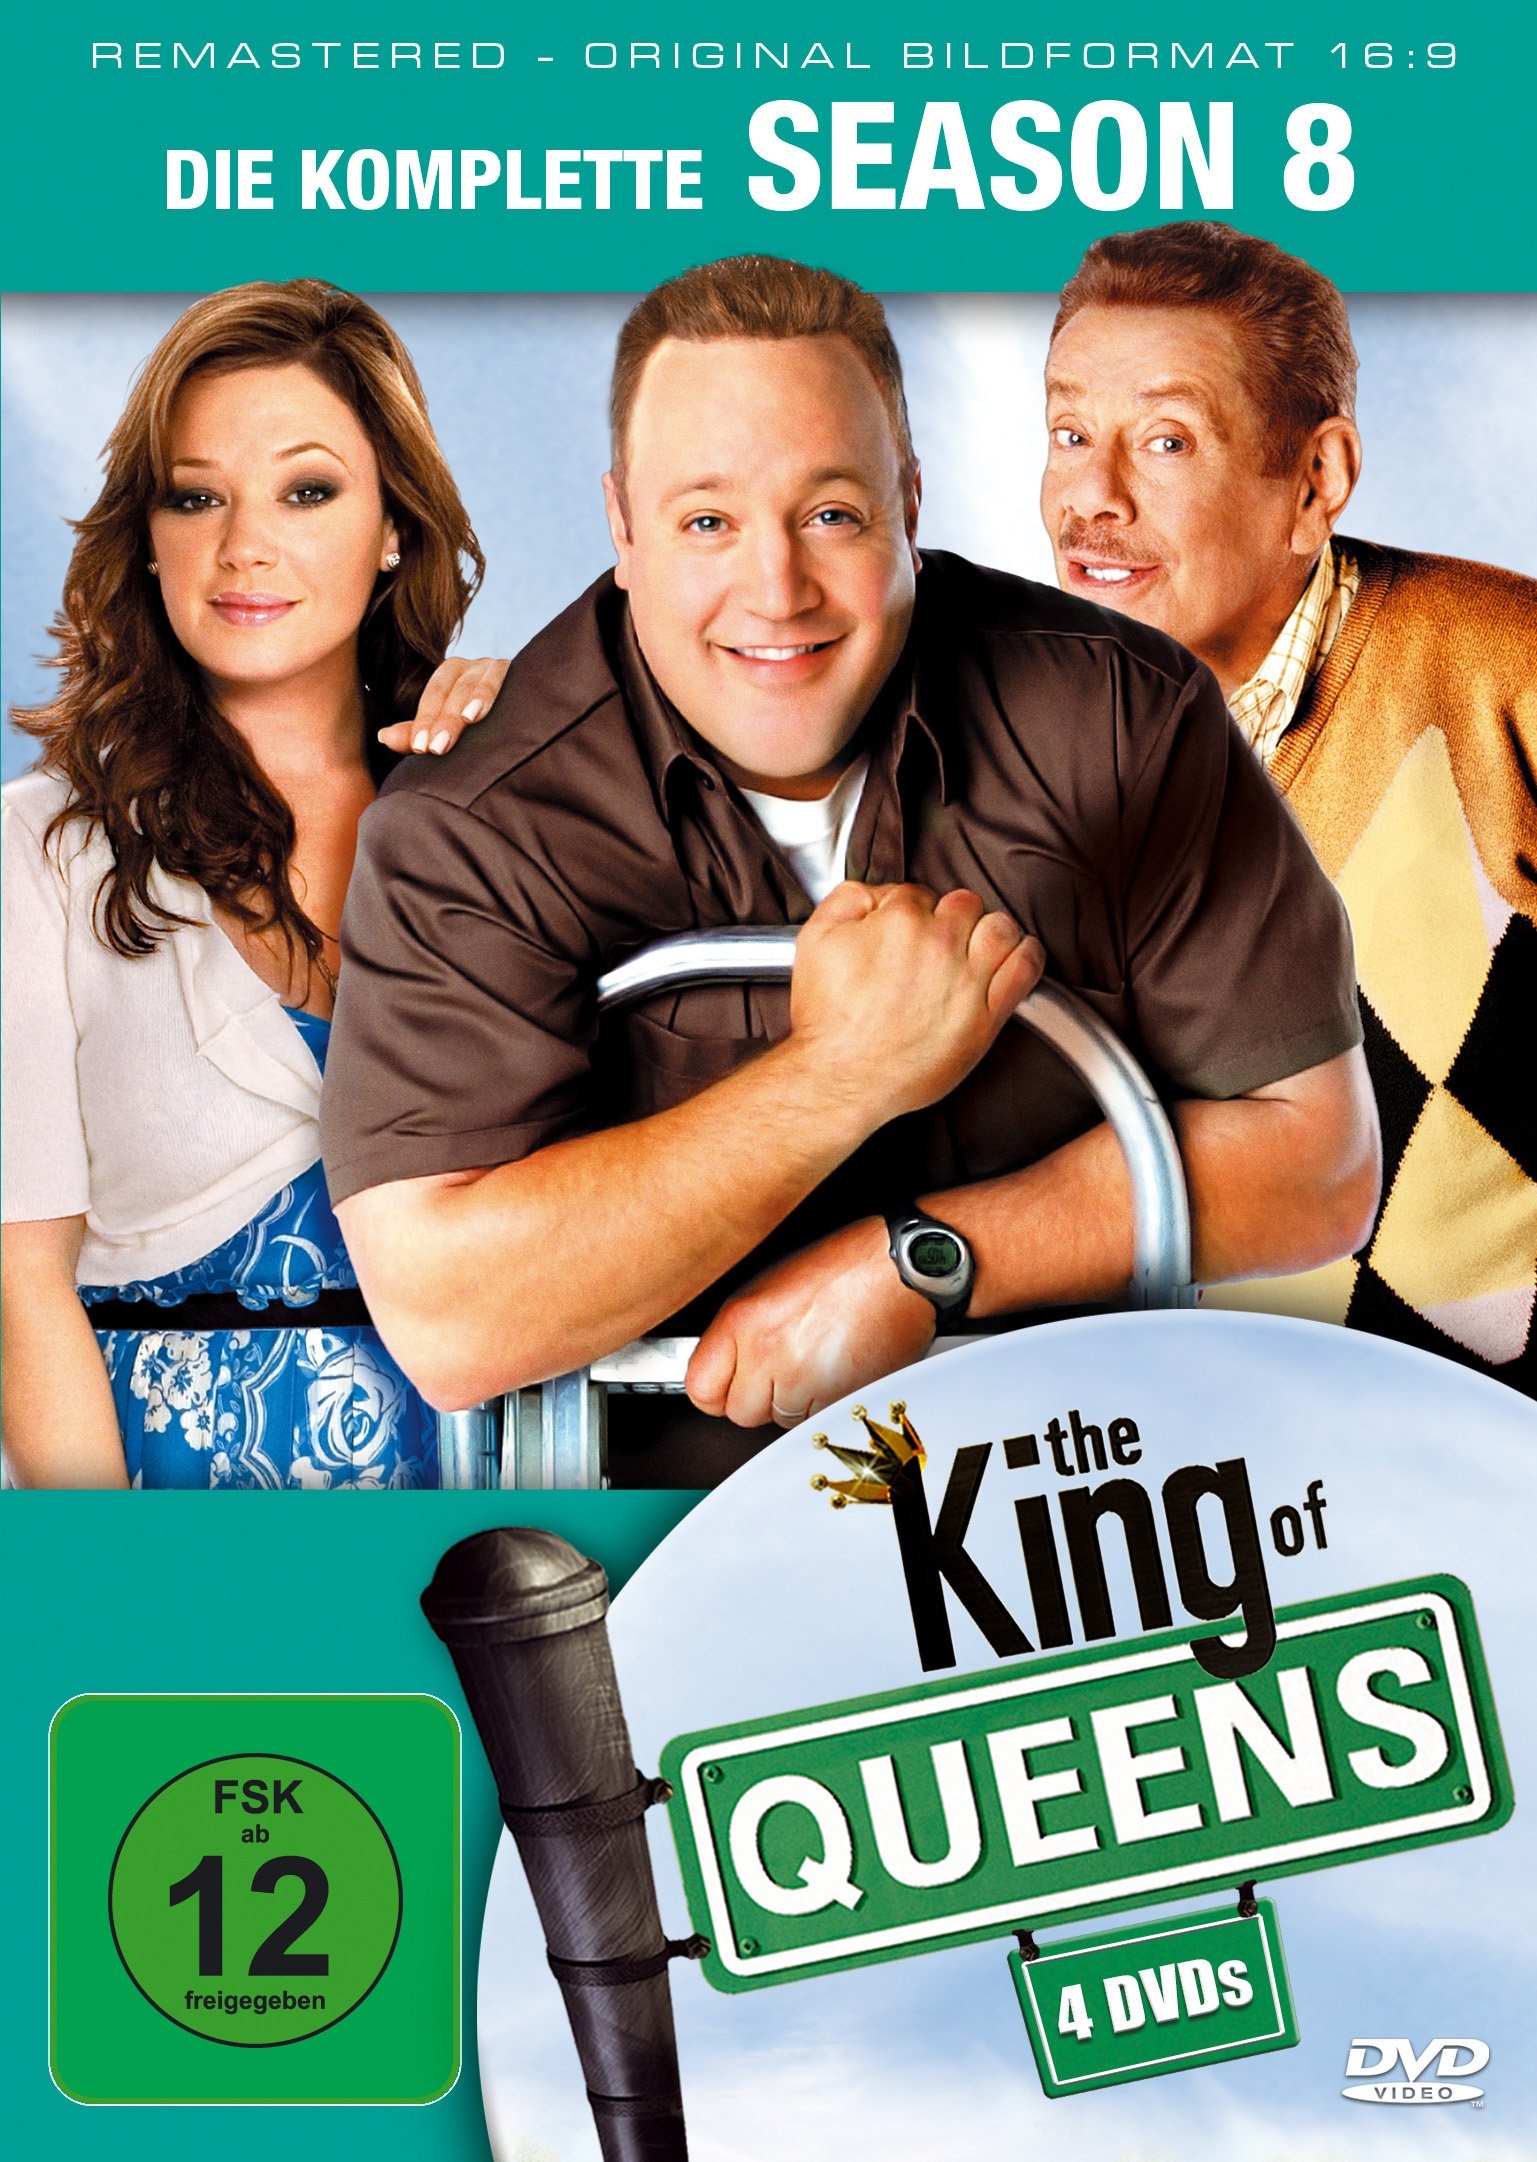 The King of Queens - Season 8 - Remastered [4 DVDs]